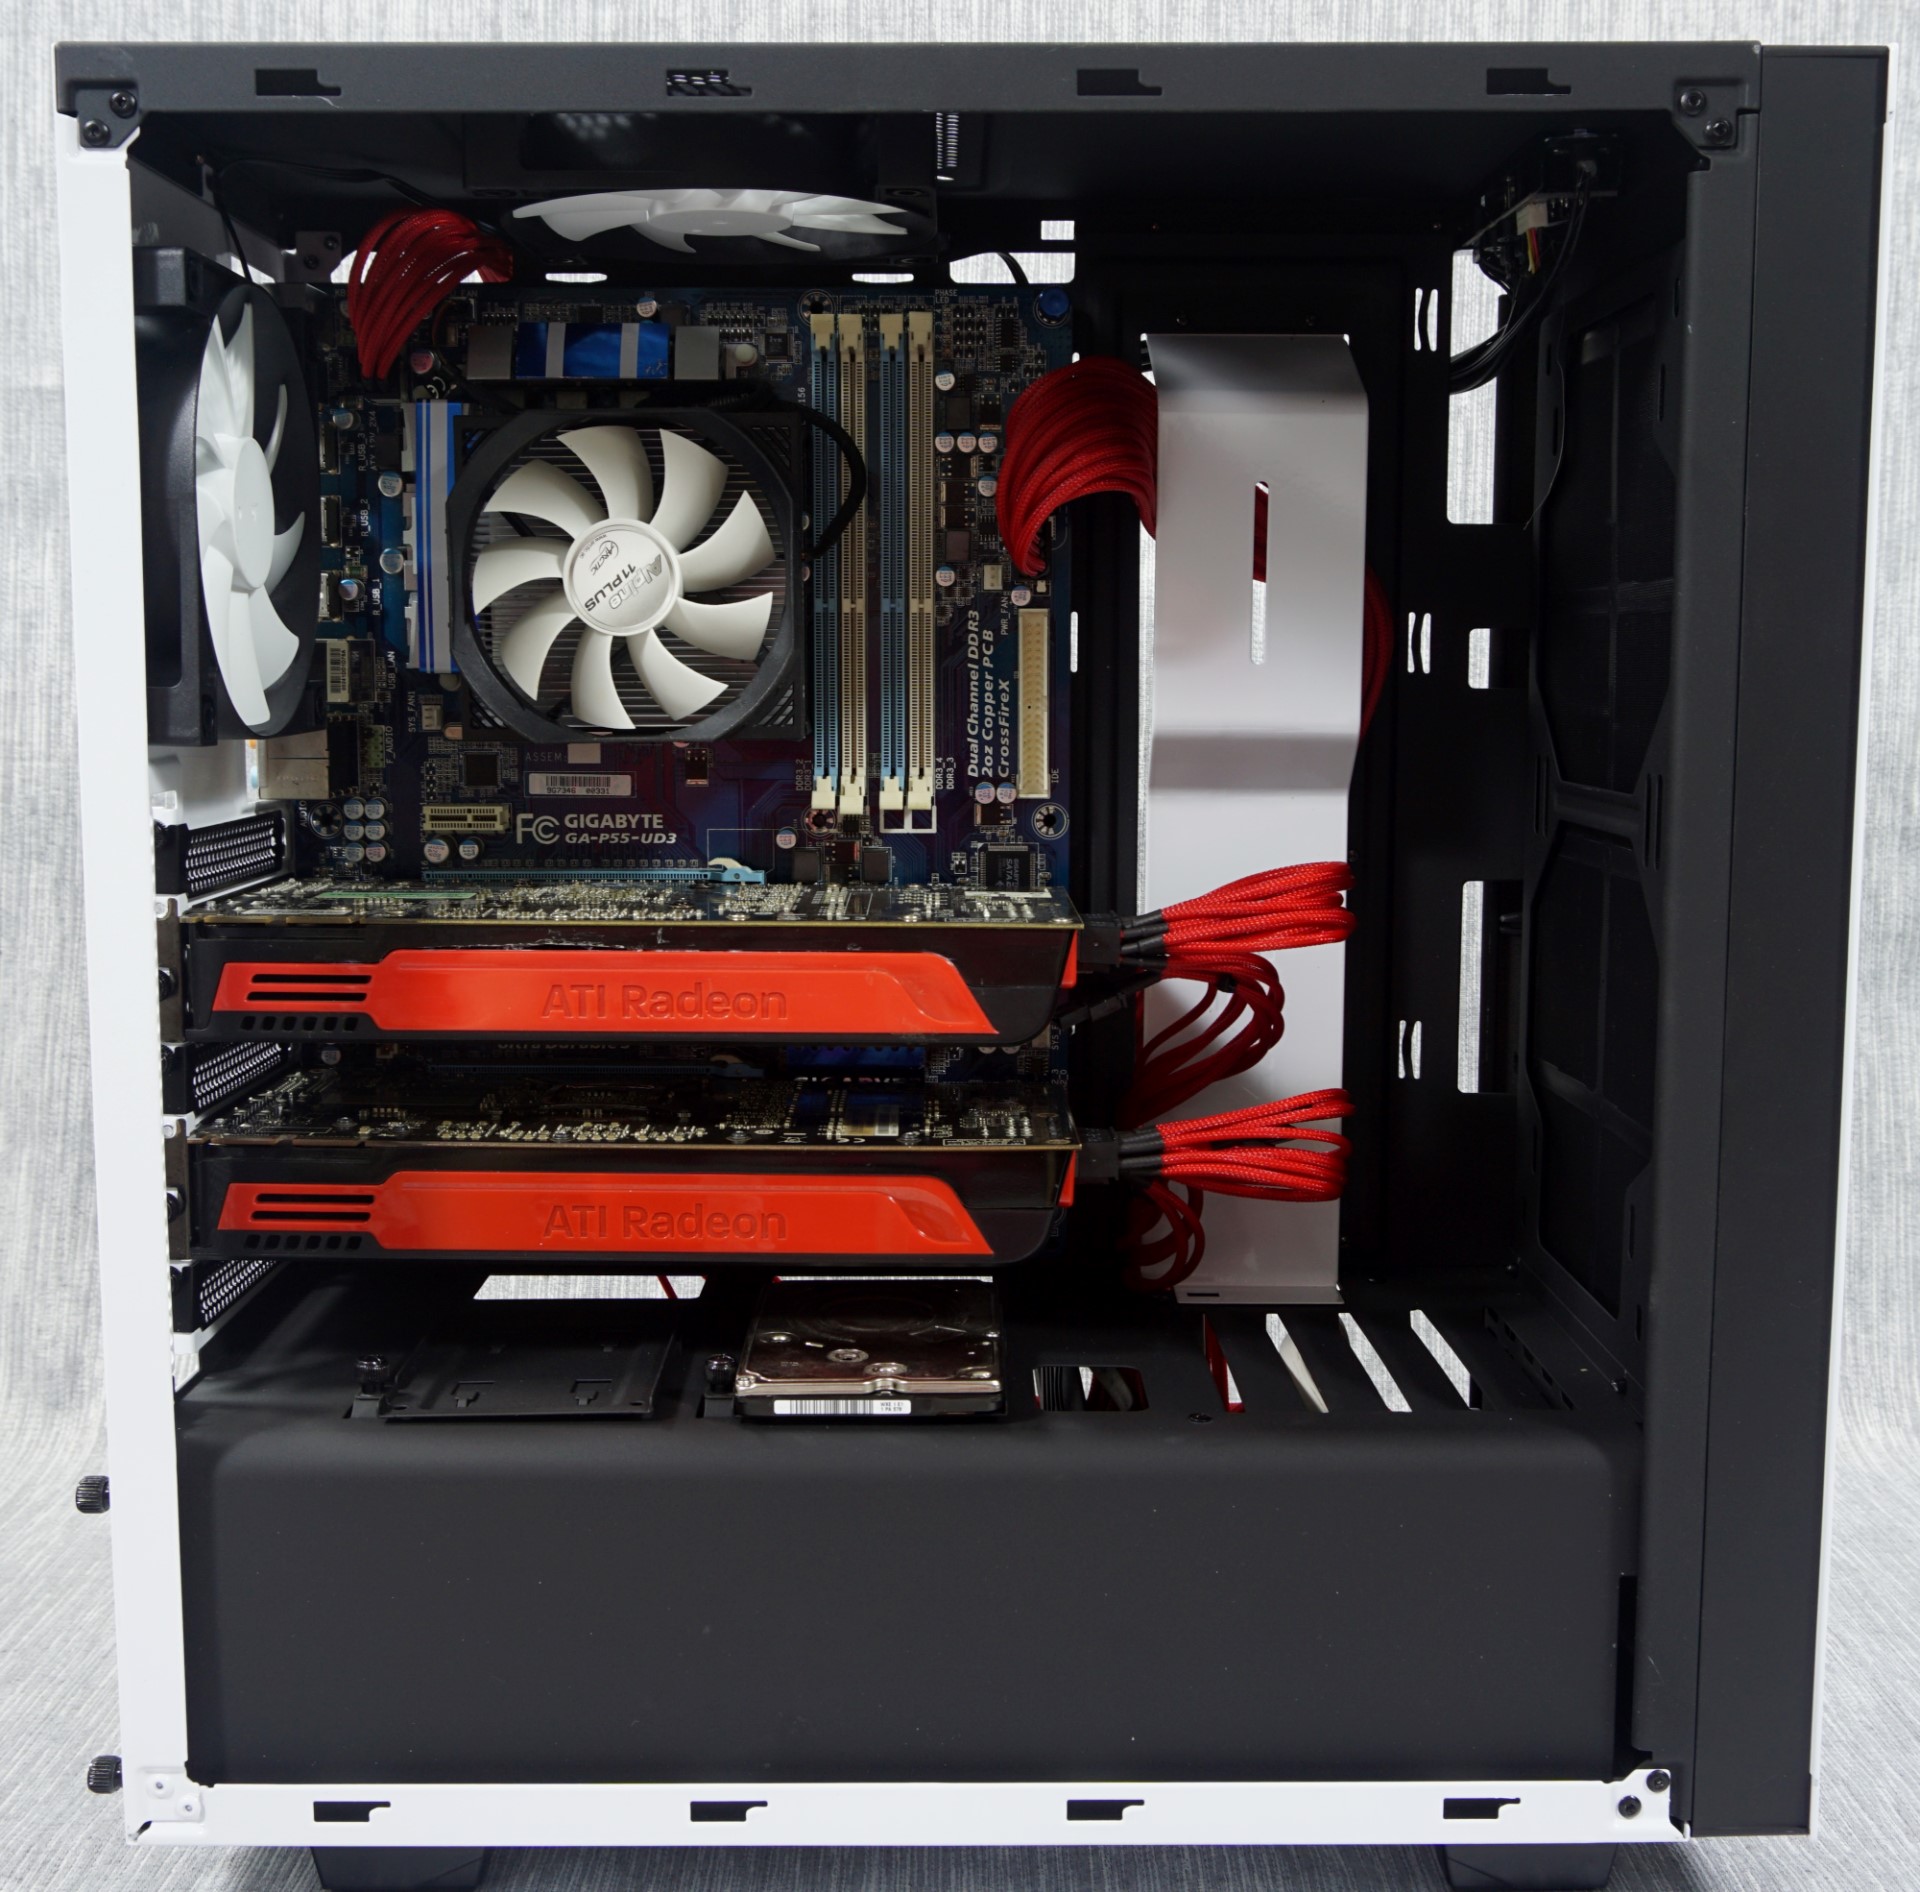 kampagne gateway indebære The Interior of the NZXT S340 - The NZXT S340 Case Review